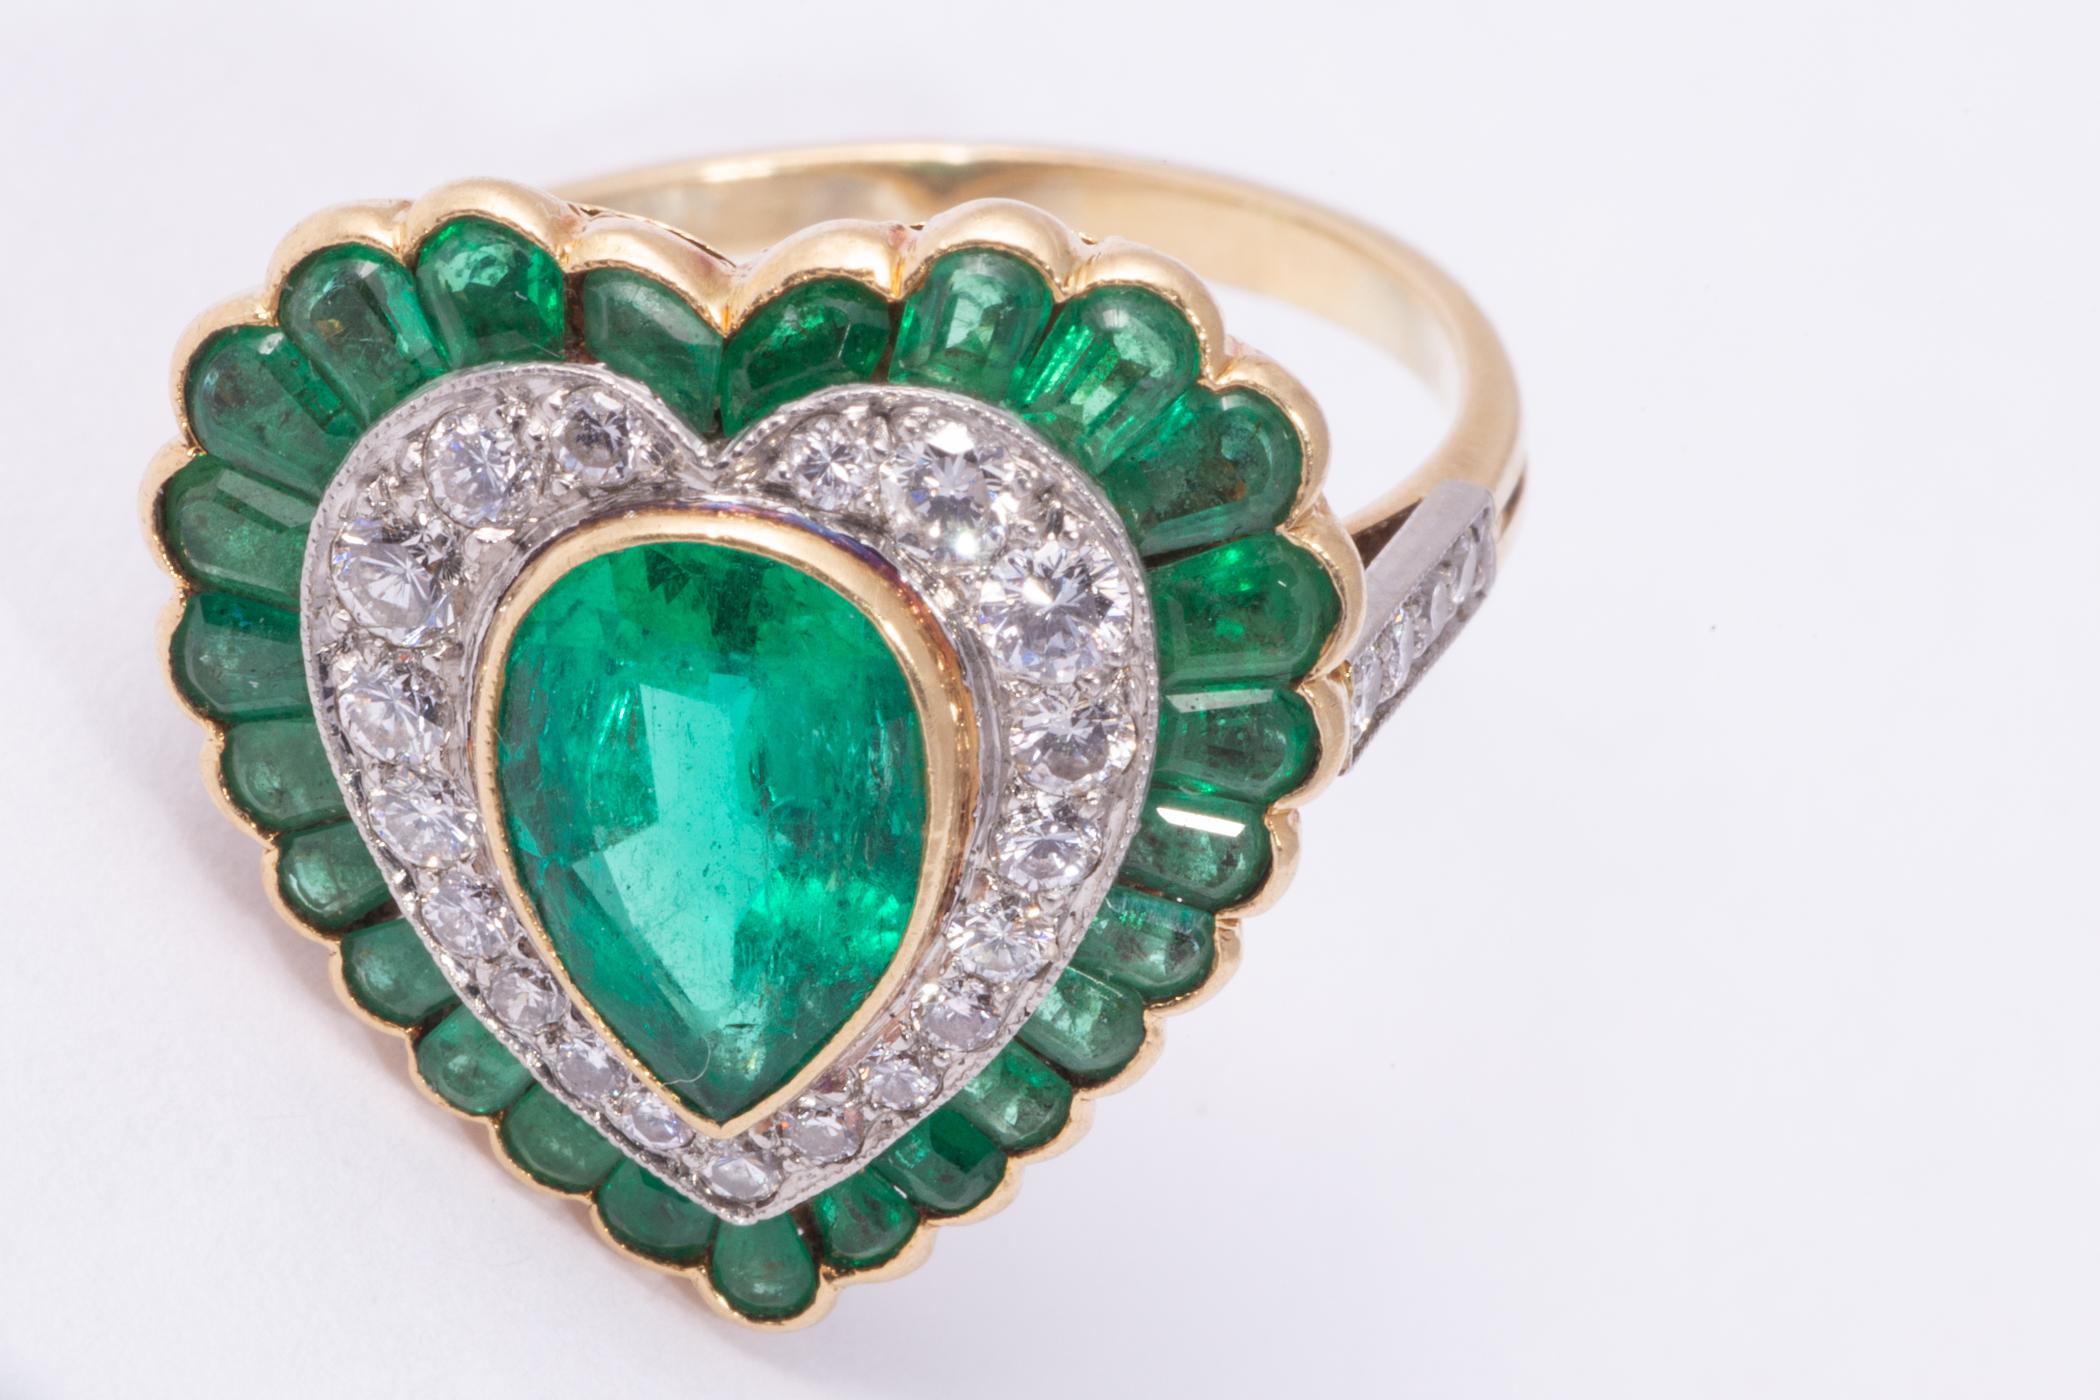 Wonderful heart shaped ring featuring a pear shape cut emerald weighing approx.2.00cts The emerald has excellent color and transparent clarity, it's a very livley emerald!. There are 19 diamonds weighing approx. .80cts and having F-G, and VS clarity